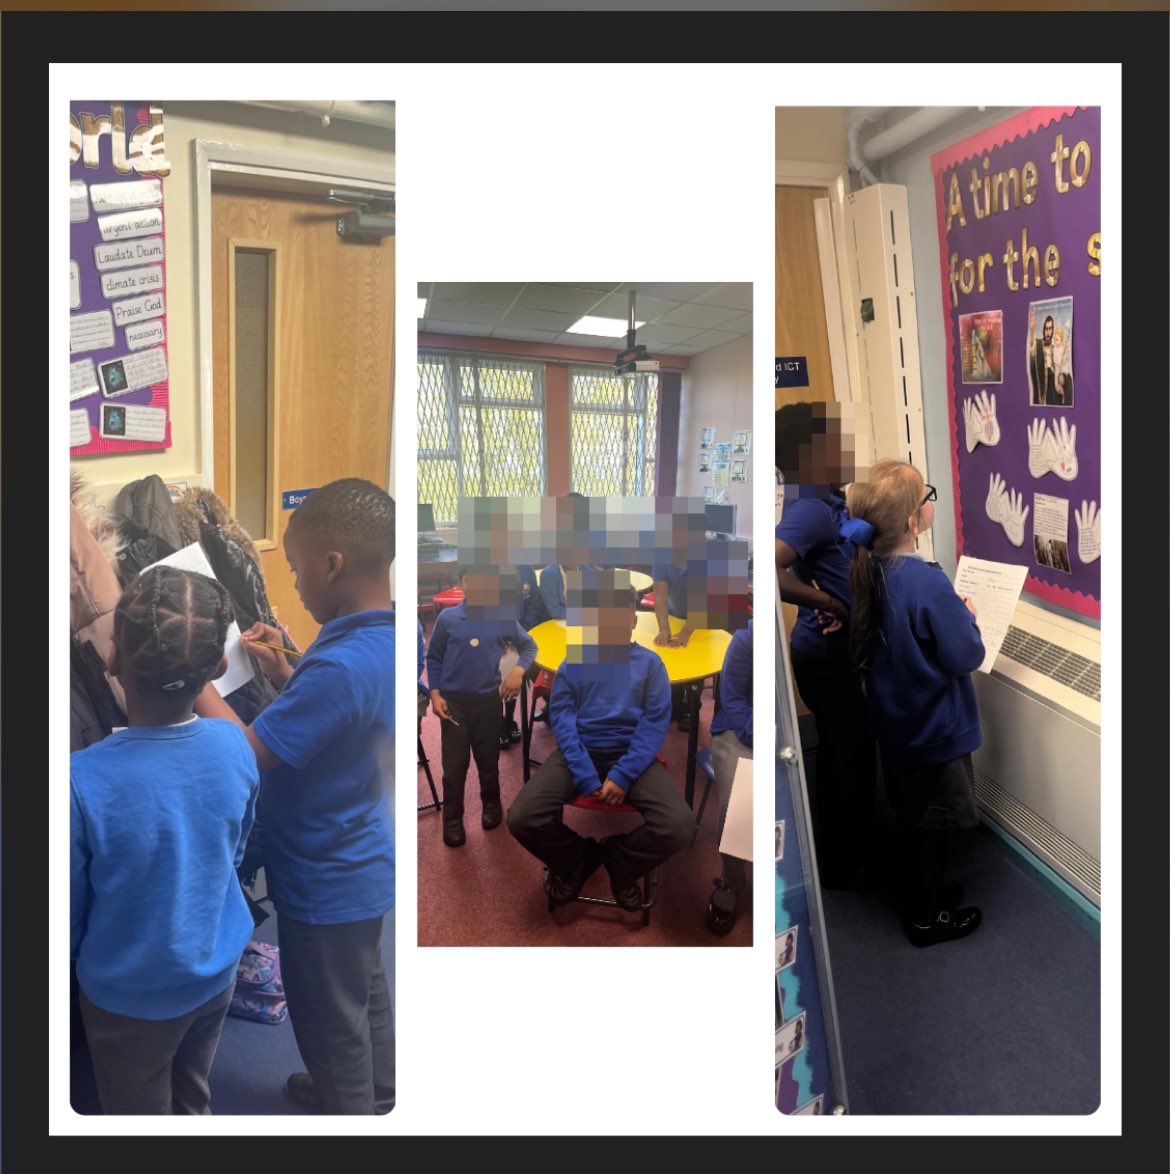 The Mission Team have been busy today! They have monitored our corridor displays and prayer areas and even had time for a meeting to discuss creating a special area outside! Watch this space! @StJohnBoscoCA